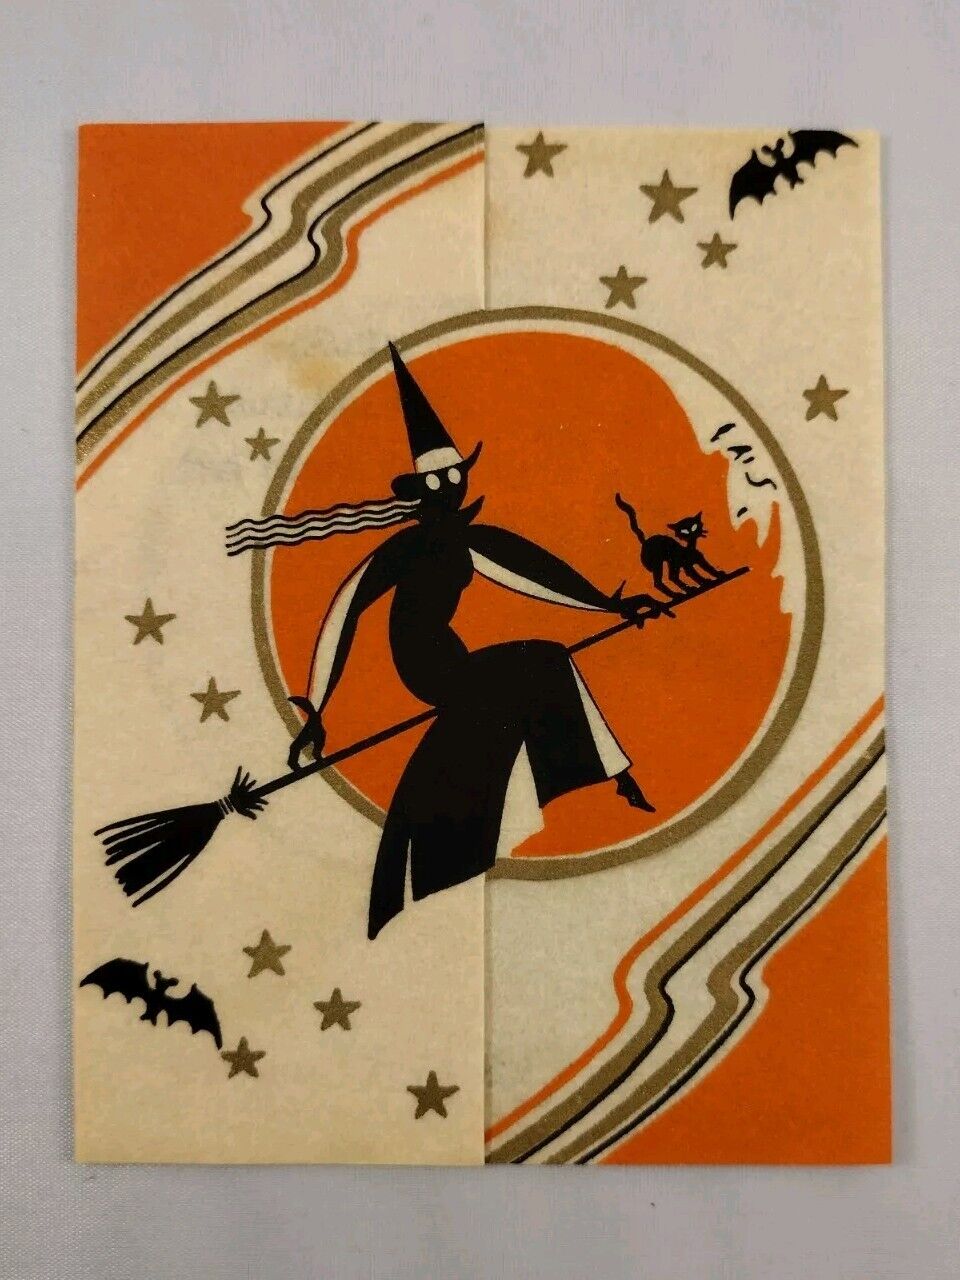 Vintage 1930s Halloween Invitation Card Witch Black Cat Bats Moon Gilded Accents